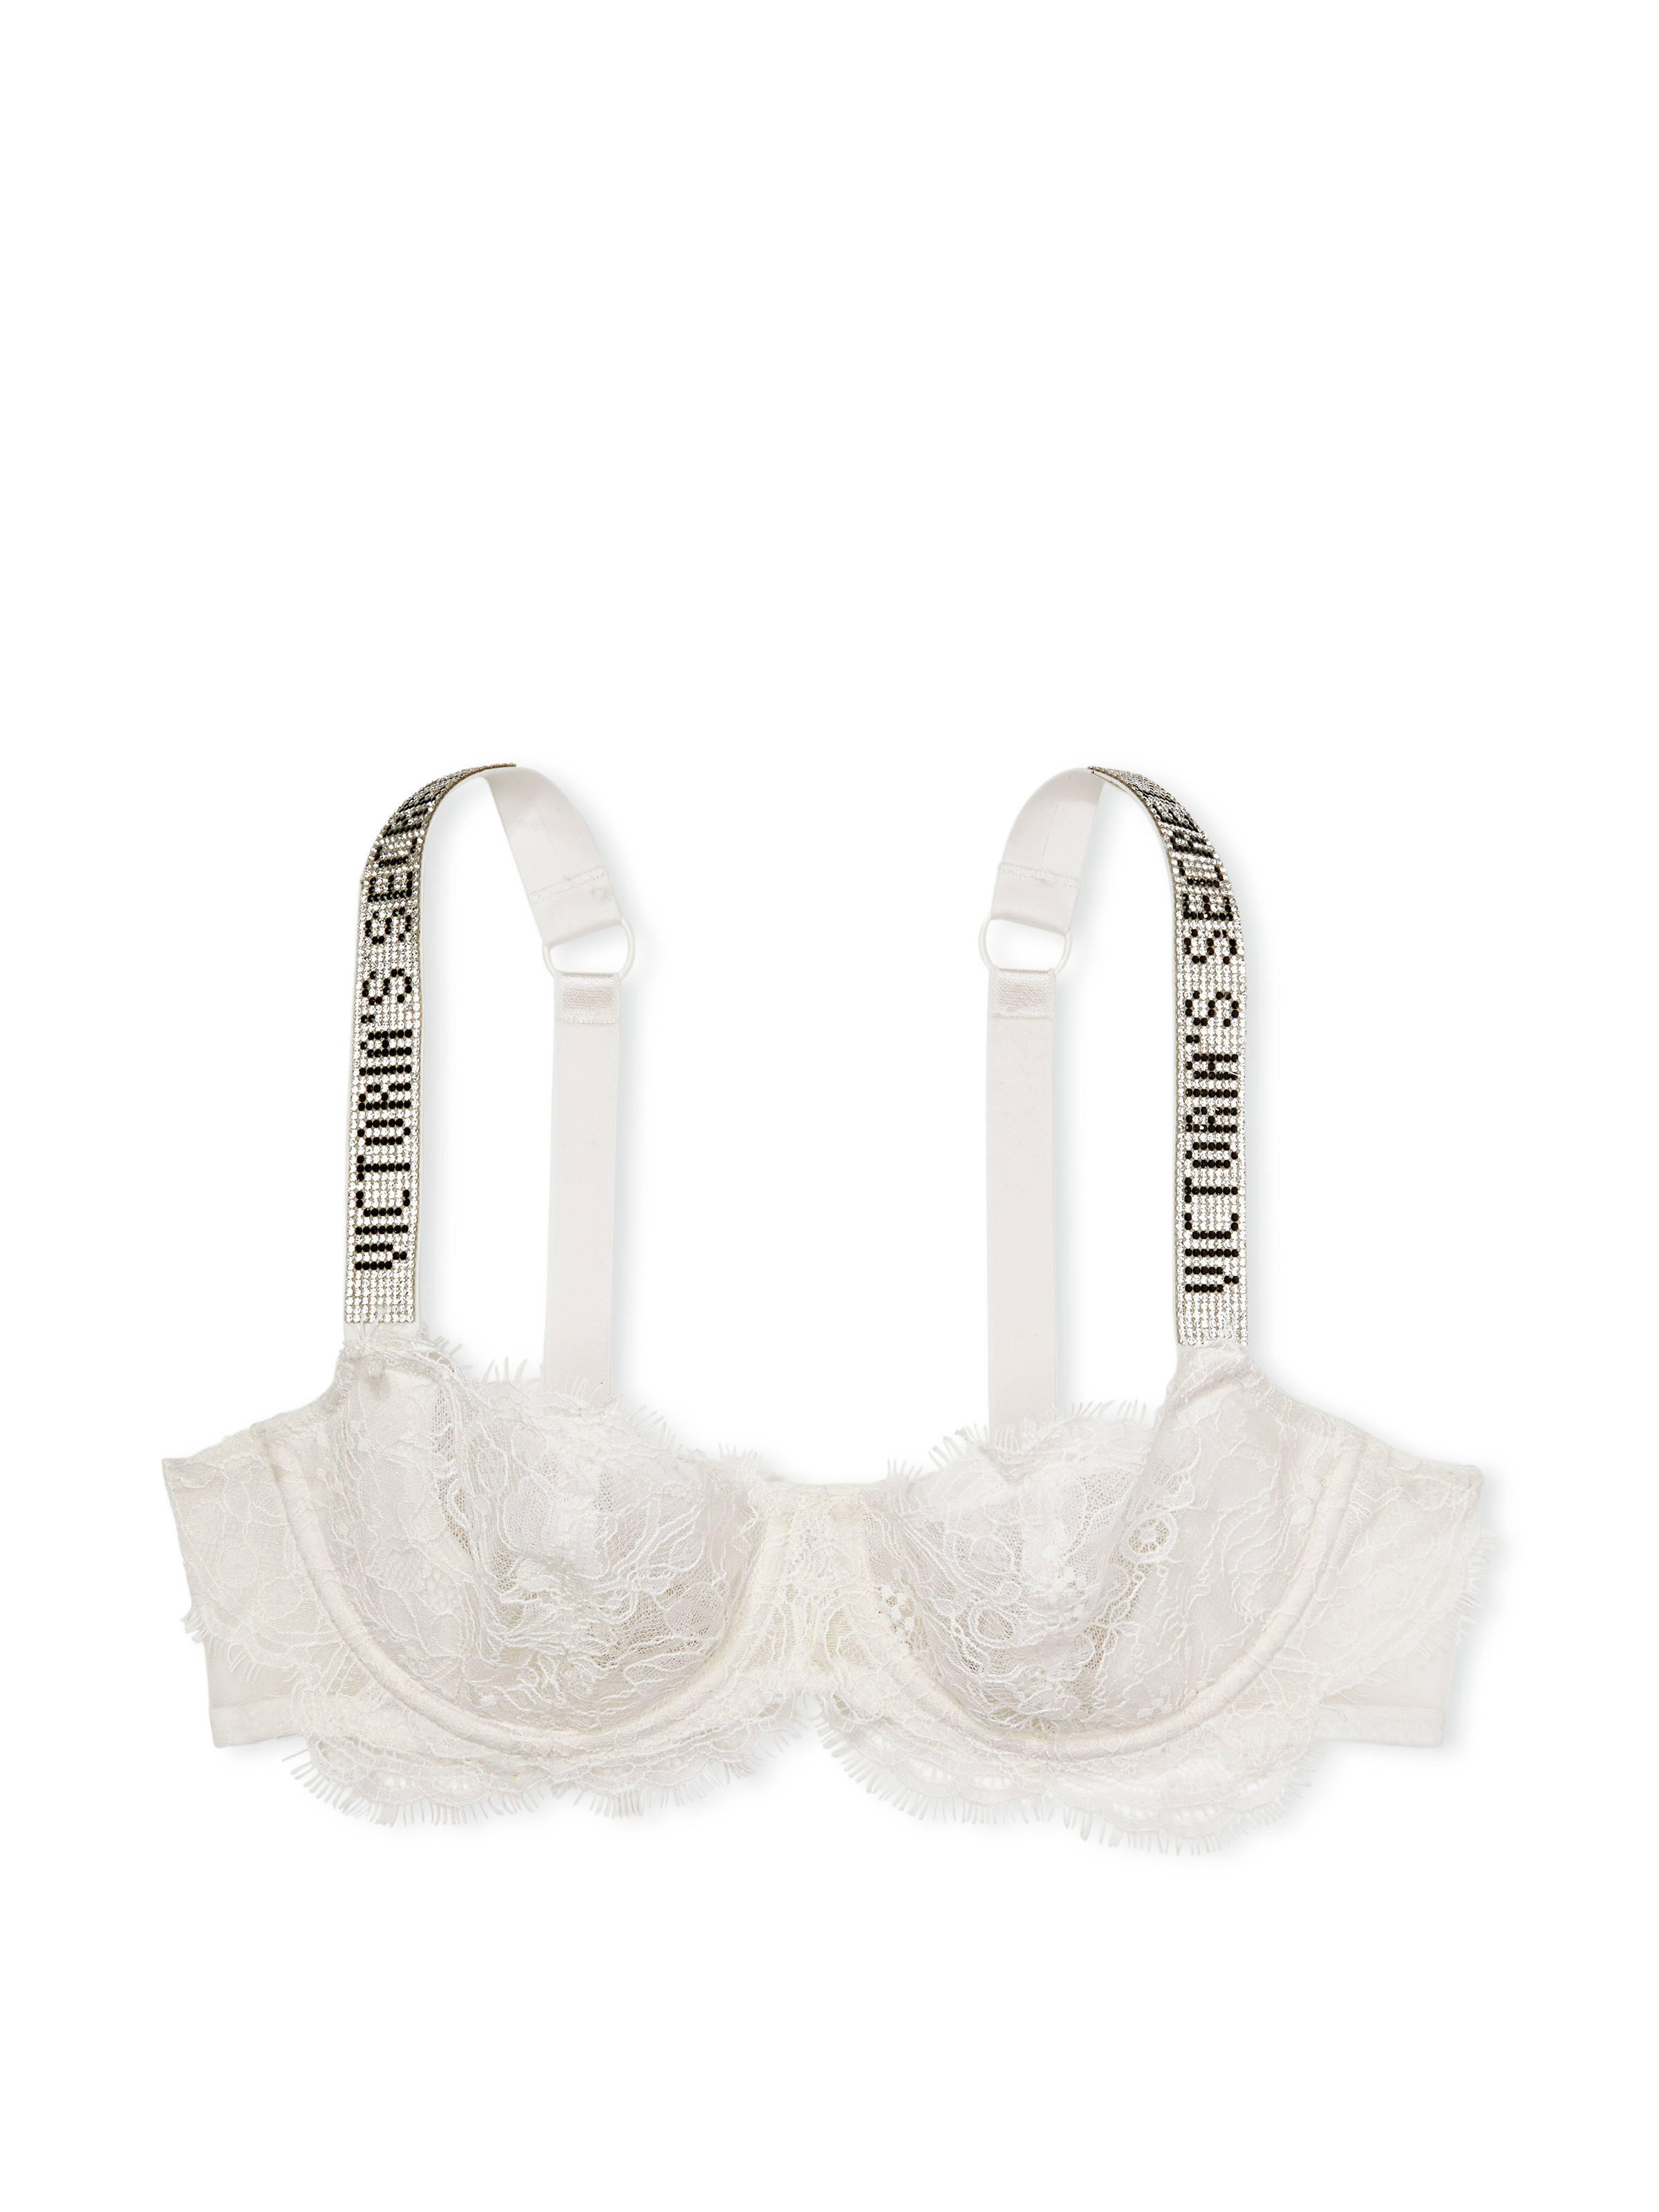 Victoria's Secret White Lace Bralette/Bandeau Size L - $8 (73% Off Retail)  New With Tags - From Melissa